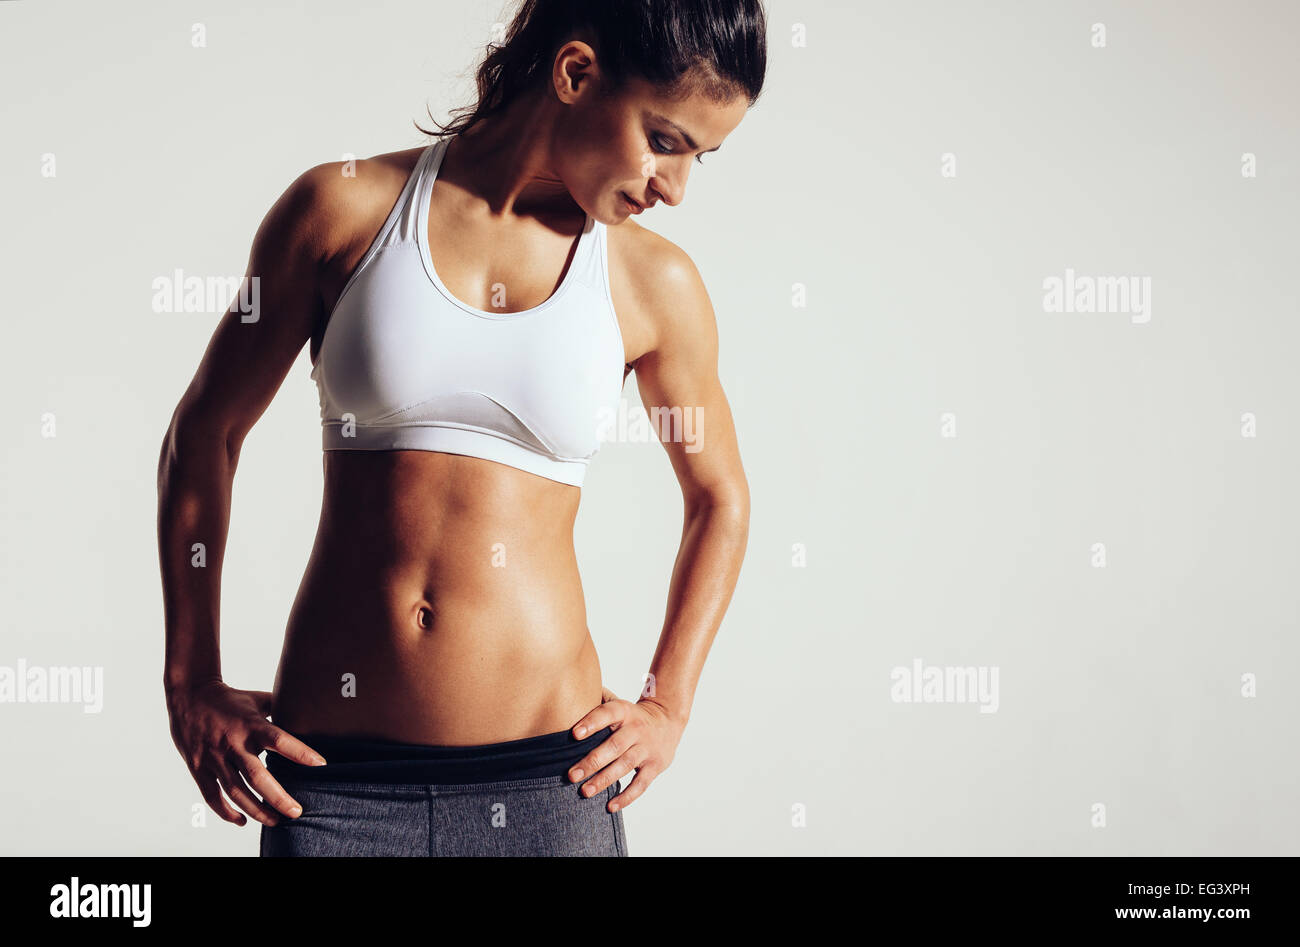 Toned Strong Young Woman in Sportswear Stock Image - Image of figure,  sportswear: 80188215